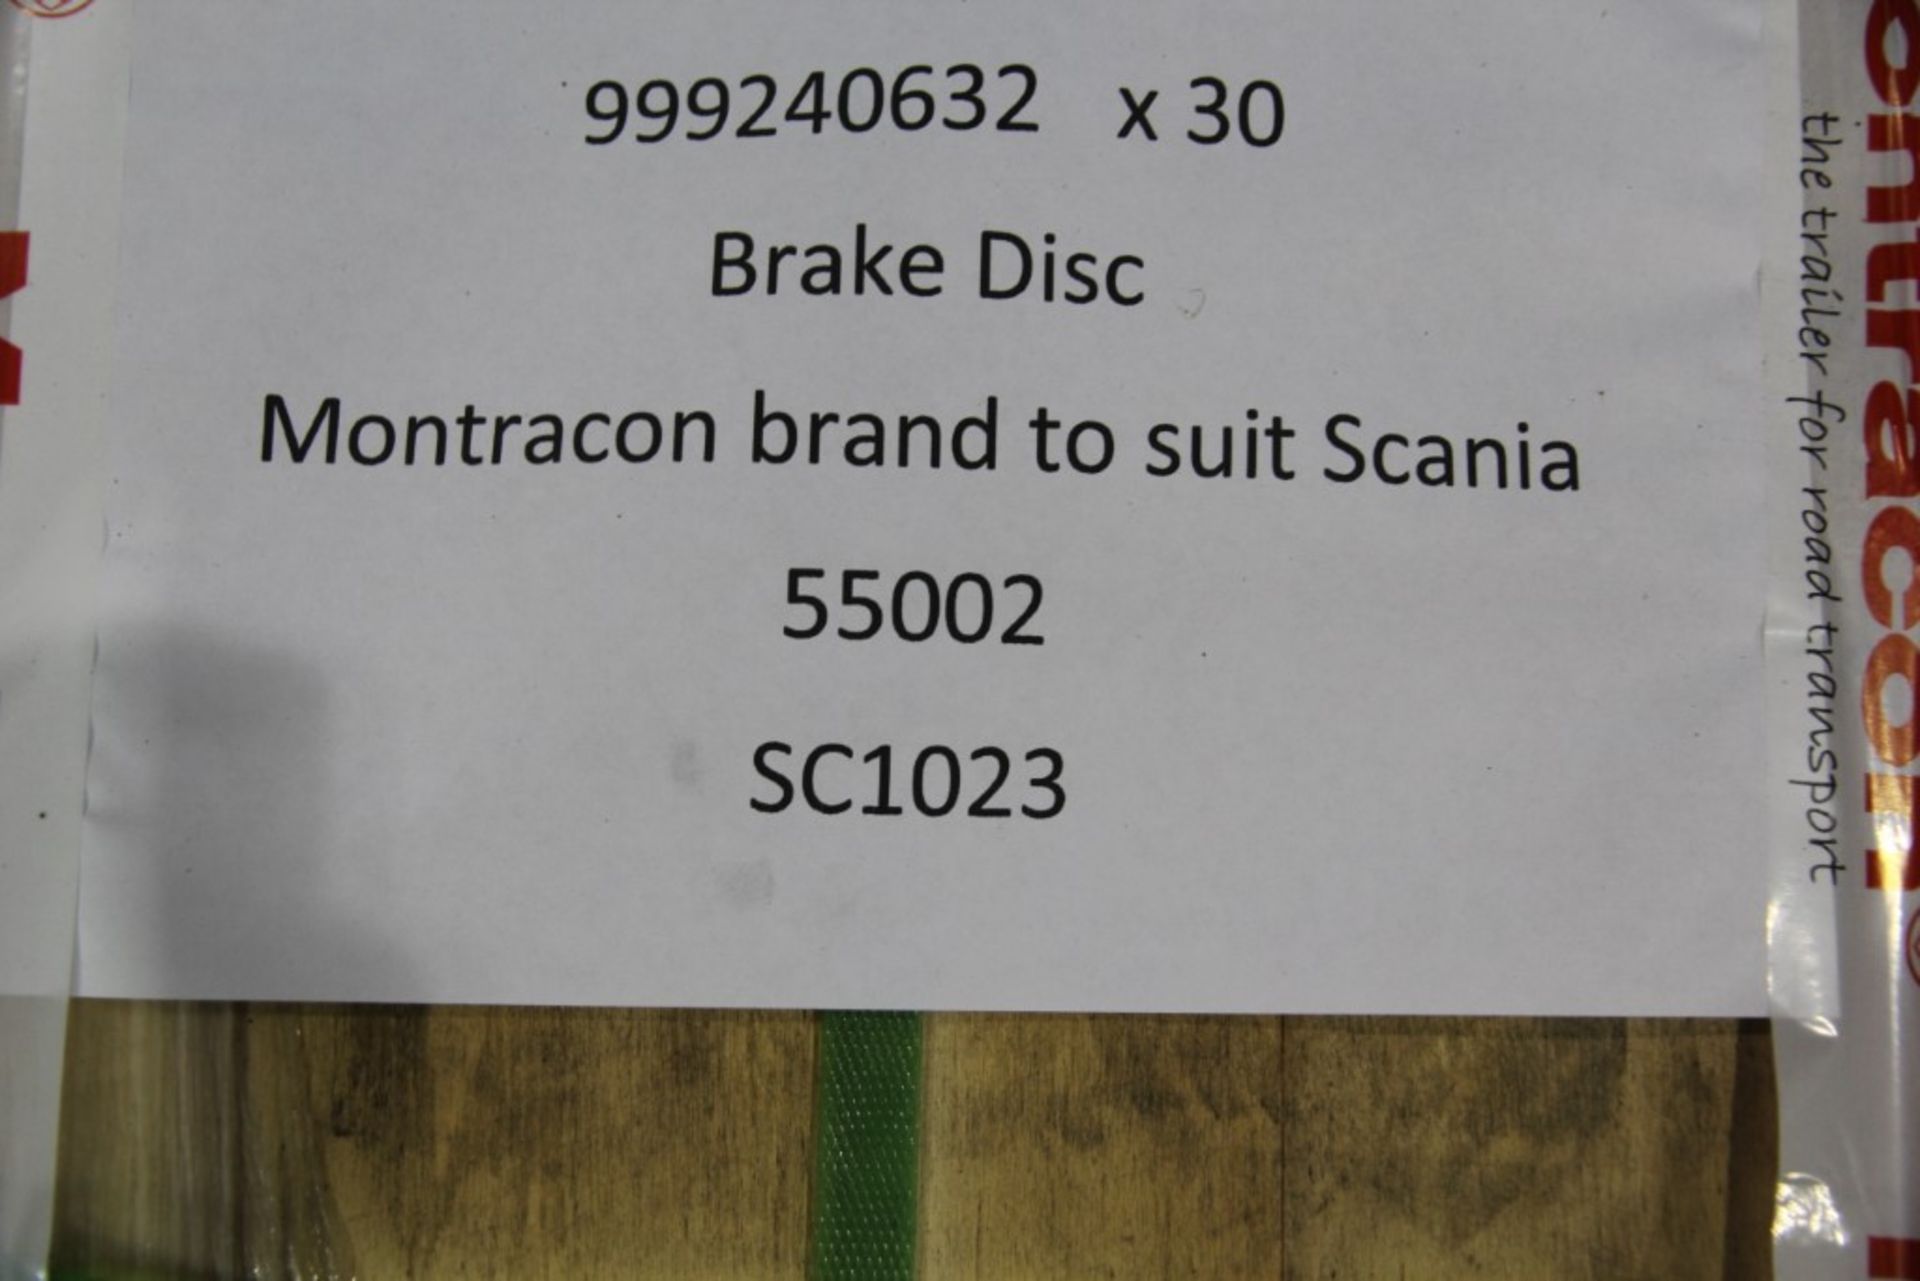 Scania / Montracon Brake Disc (30 of), Scania P/N: 55002 / SC1023 - Image 3 of 4